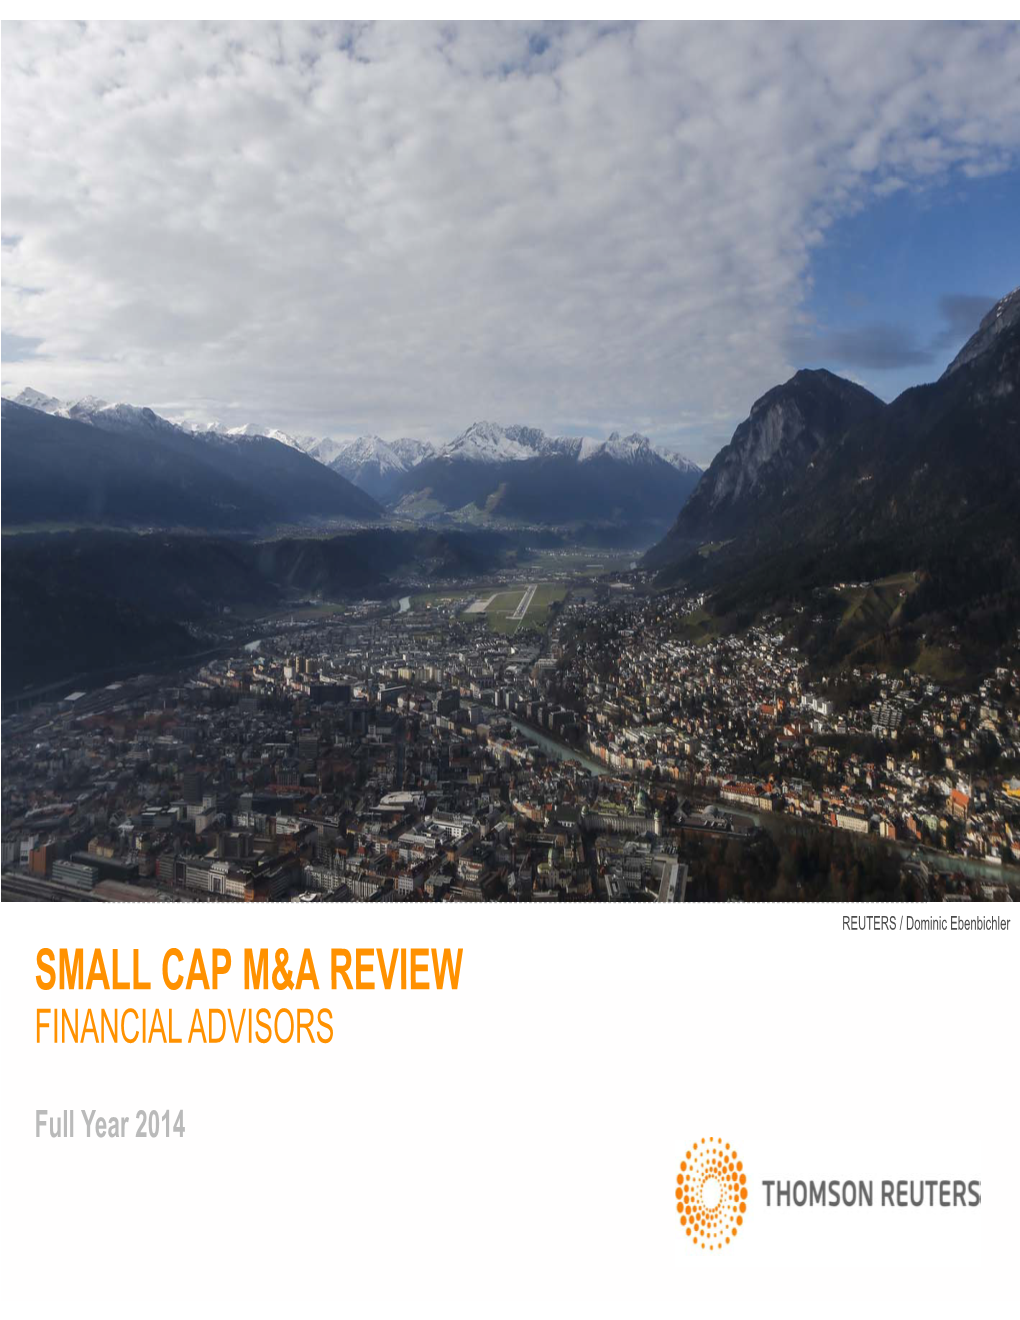 Small Cap M&A Review